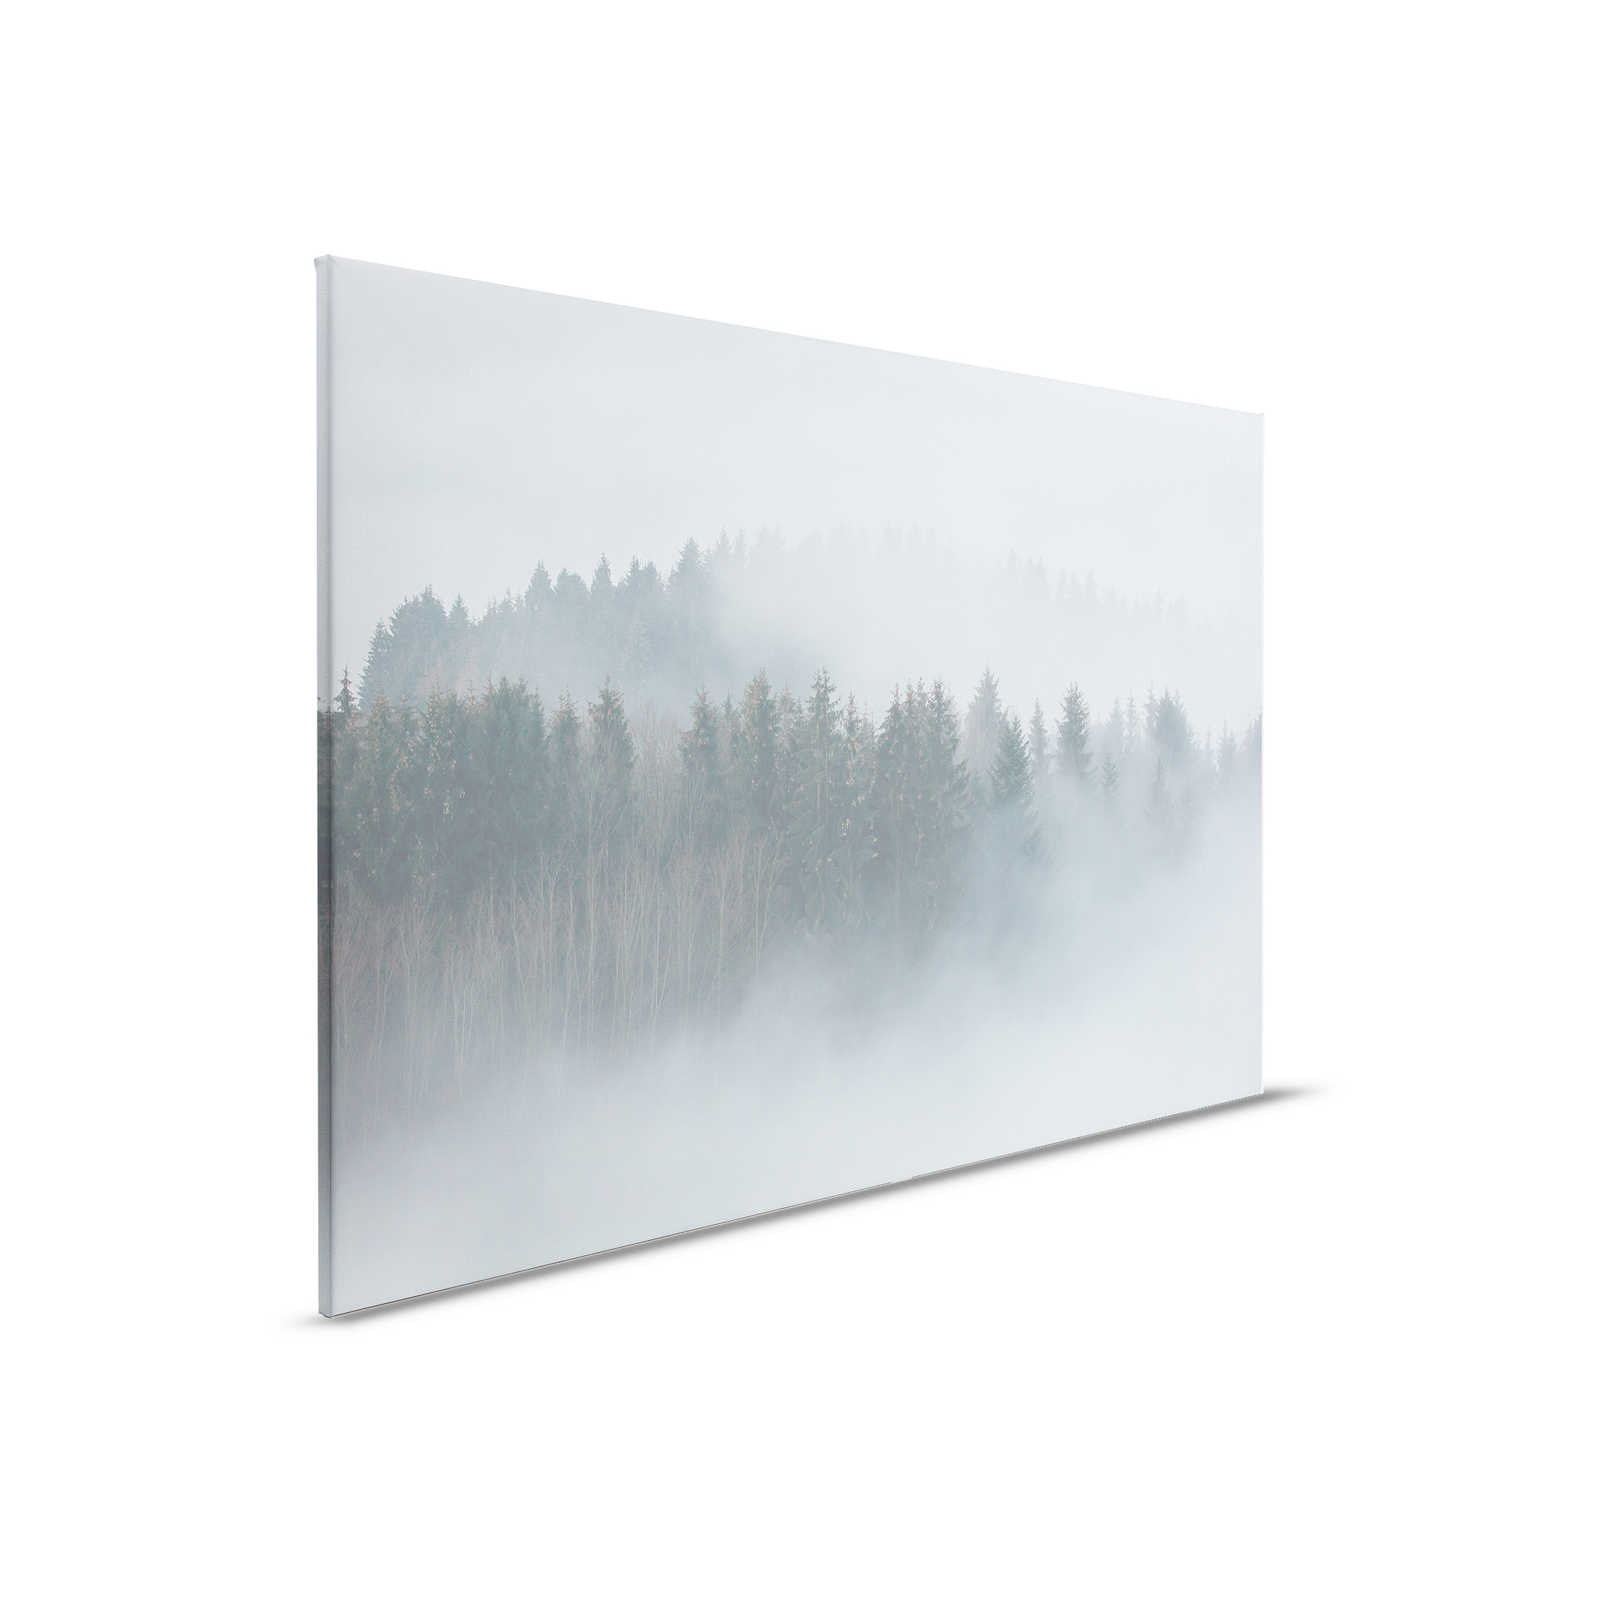         Canvas with mysterious forest in the mist - 0.90 m x 0.60 m
    